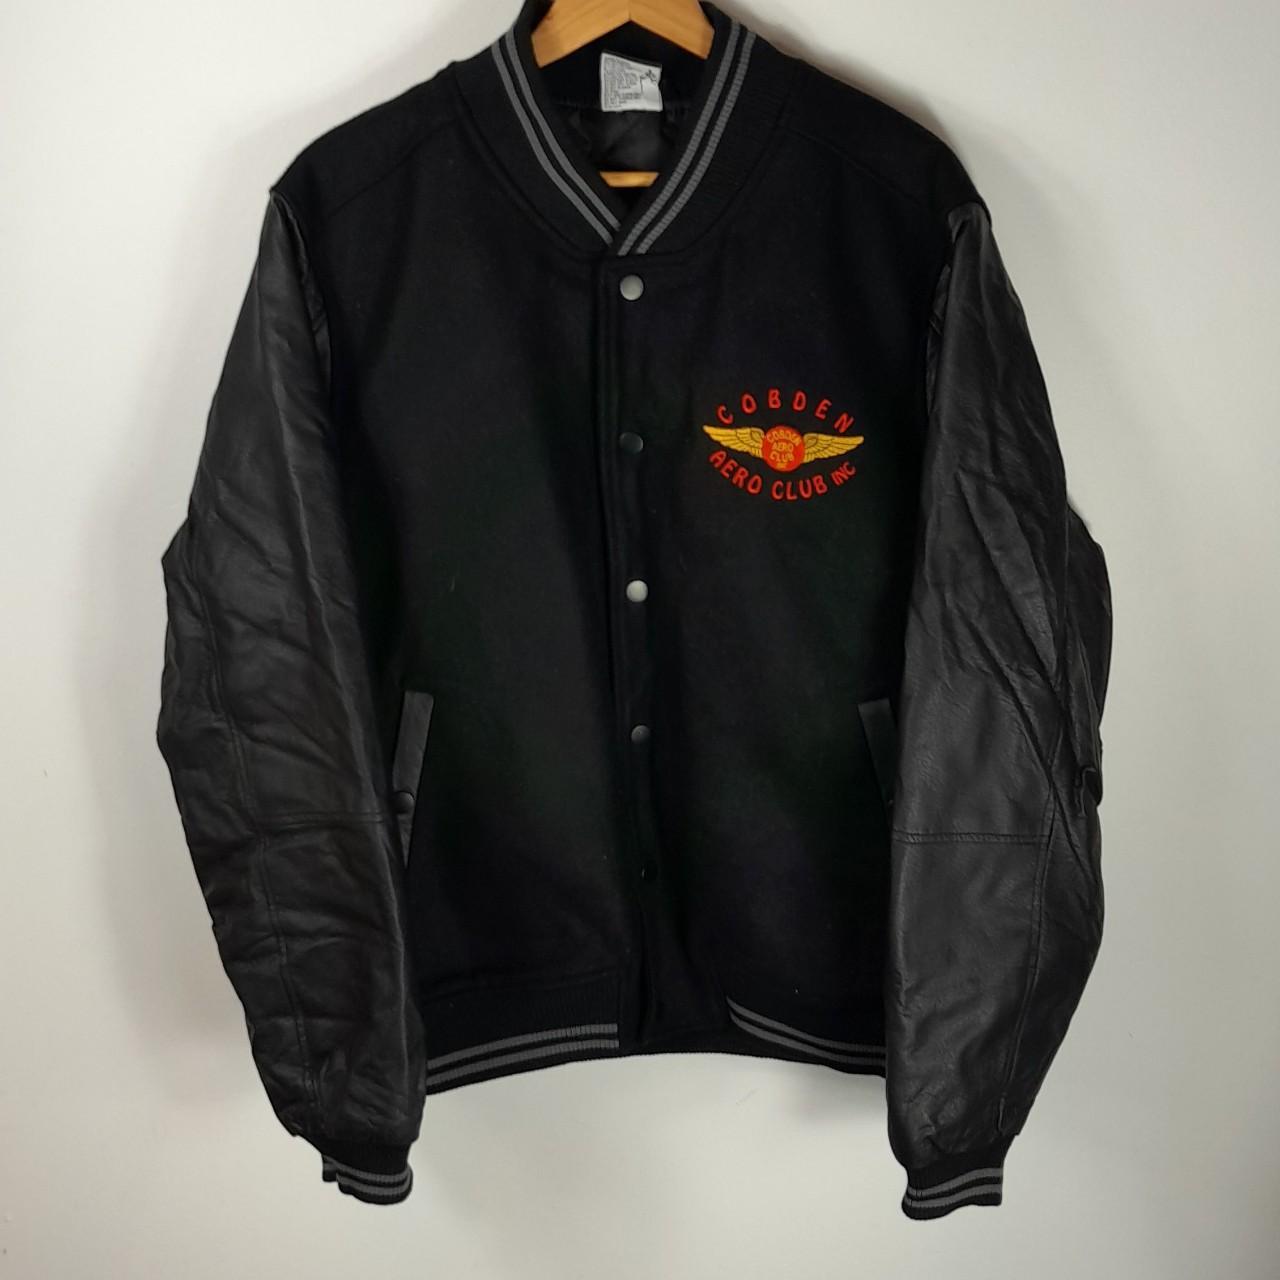 JB's 'Cobden Aero Club' bomber jacket with quilted... - Depop